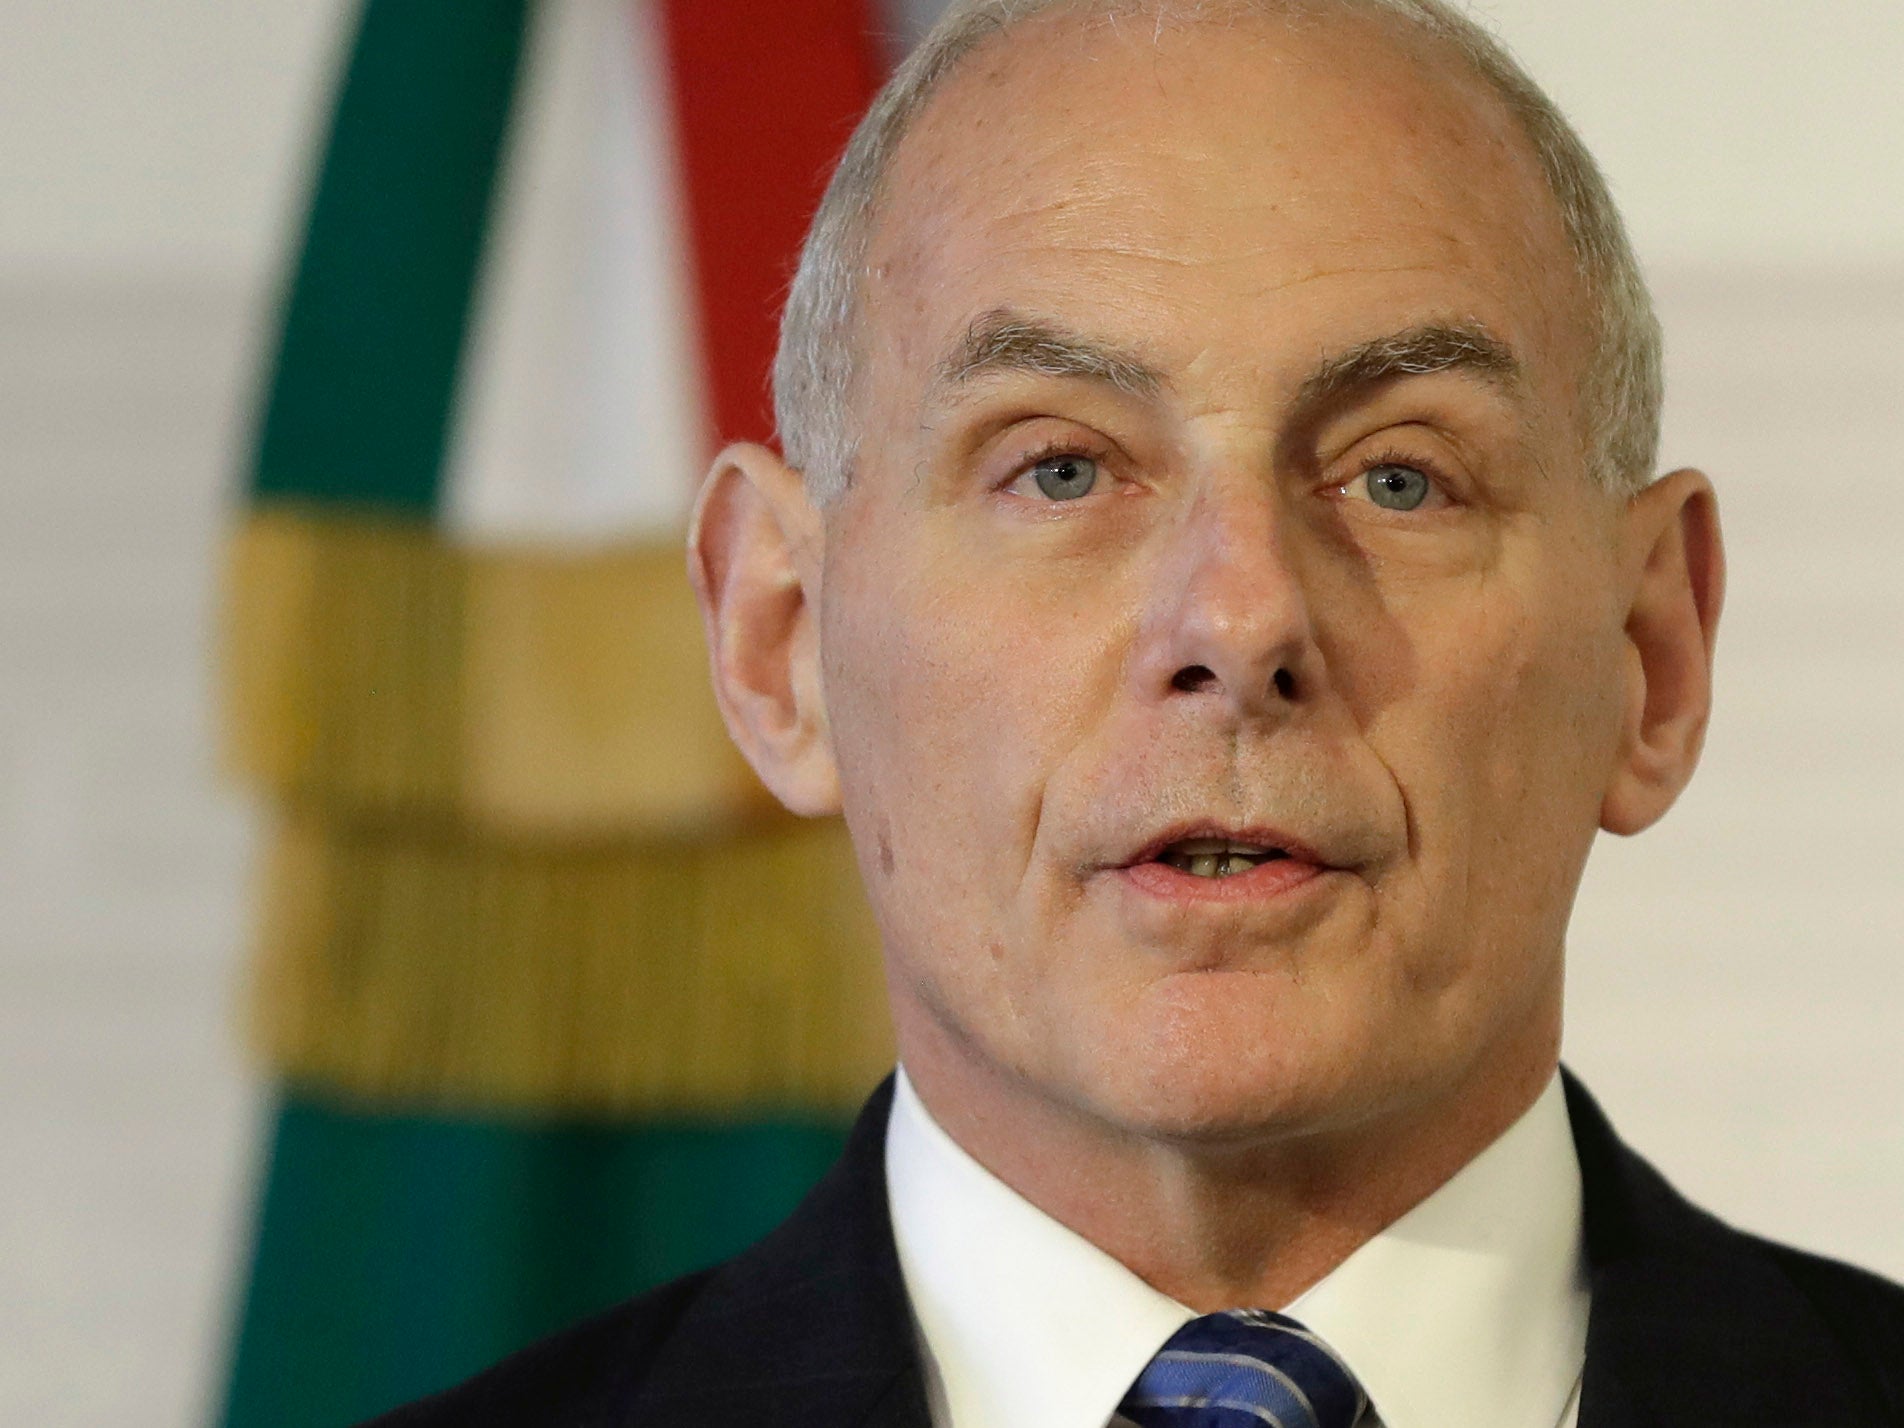 US Homeland Security Secretary John Kelly at a joint statement to the press by US and Mexican officials in Mexico City